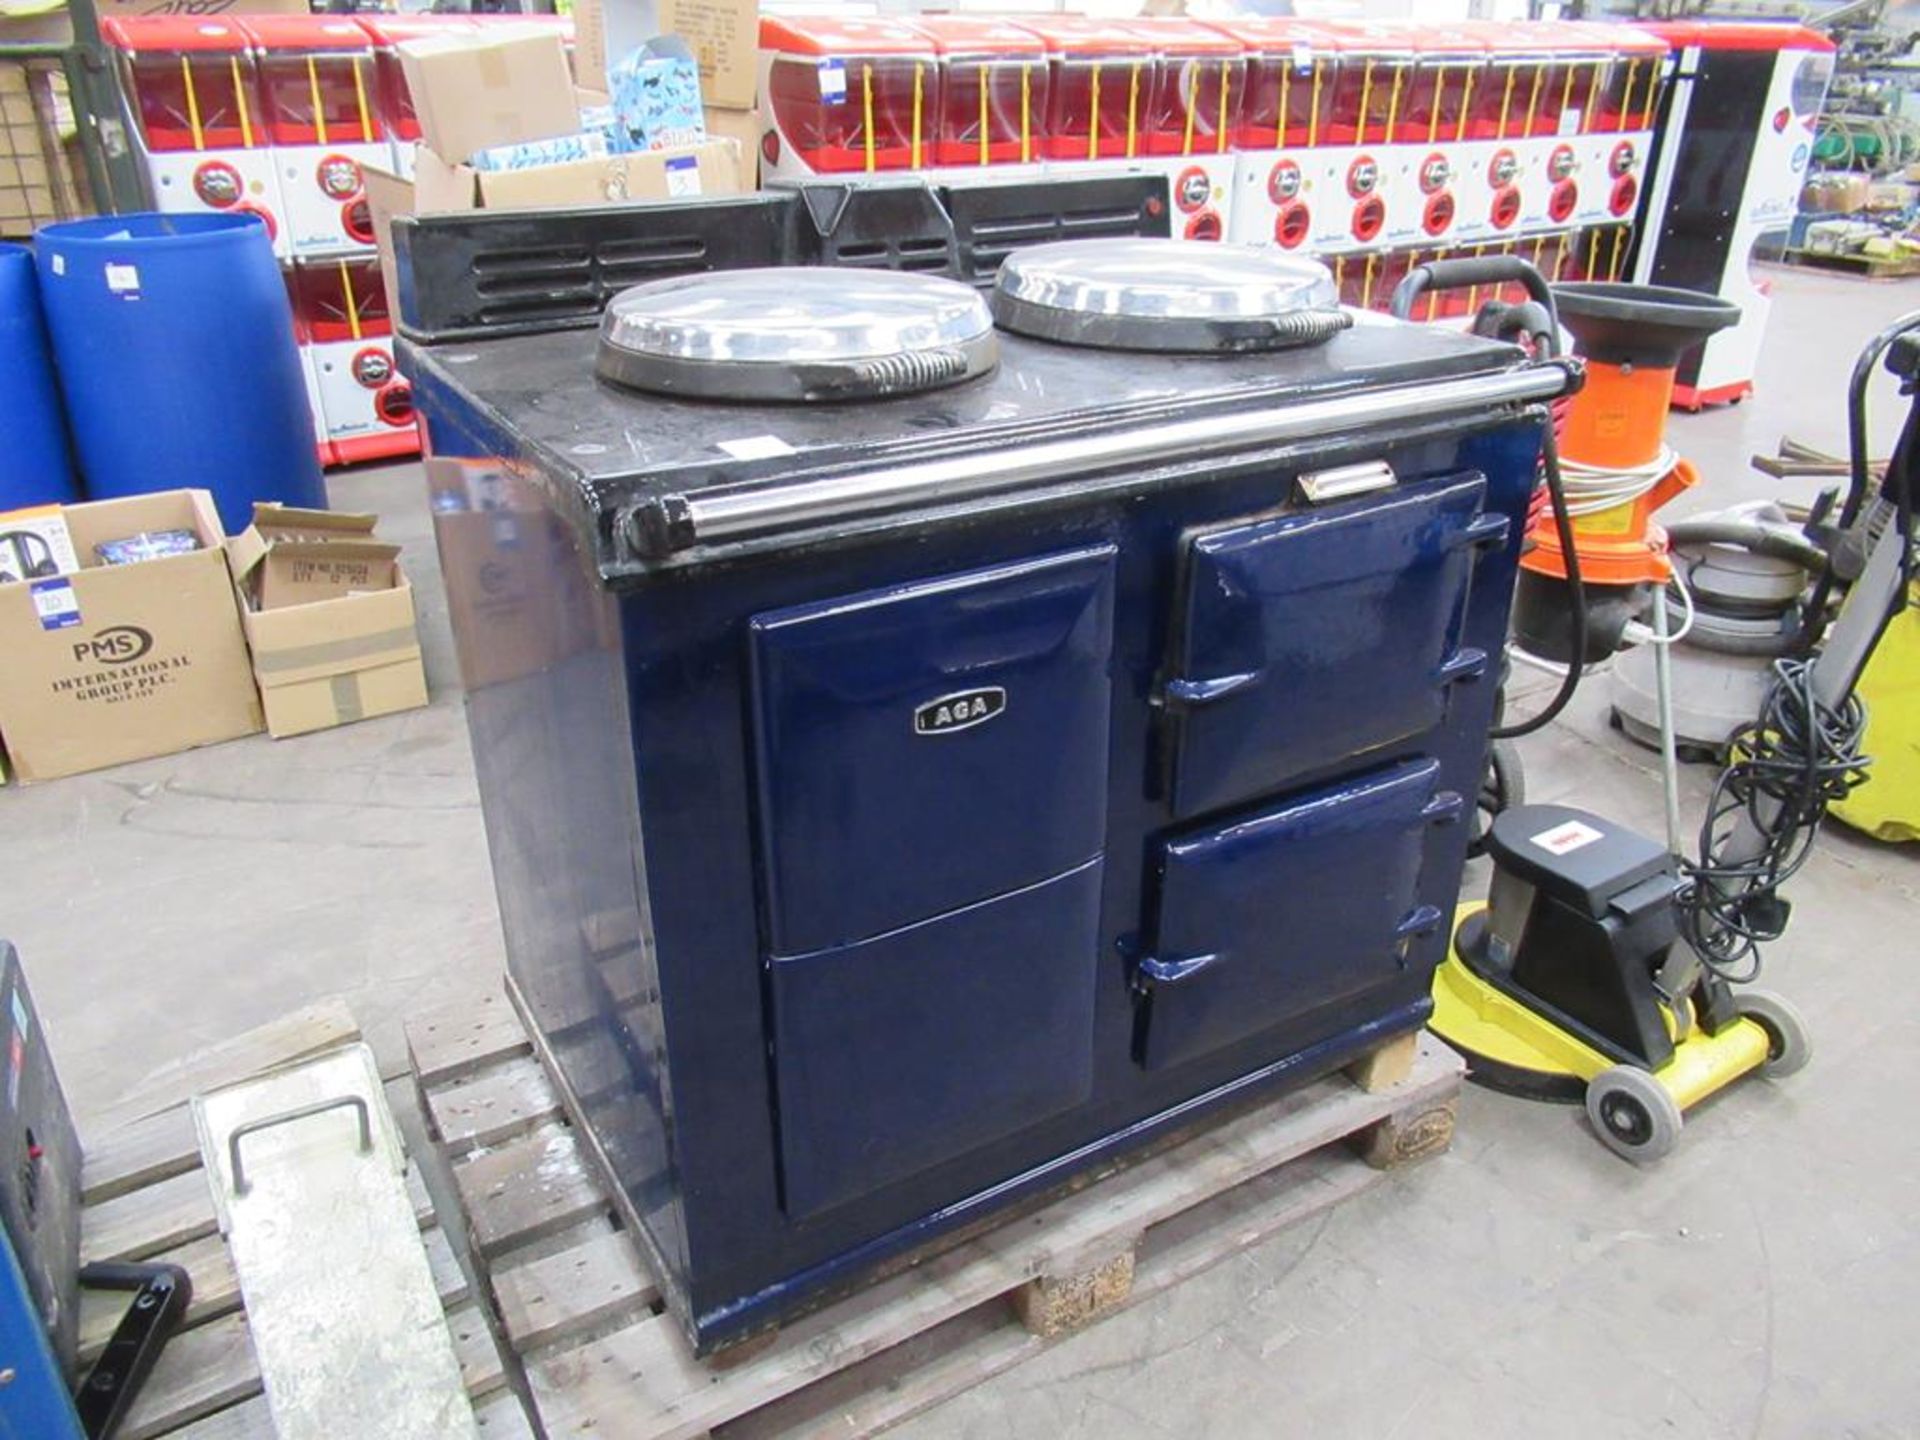 AGA vintage style electric cooker